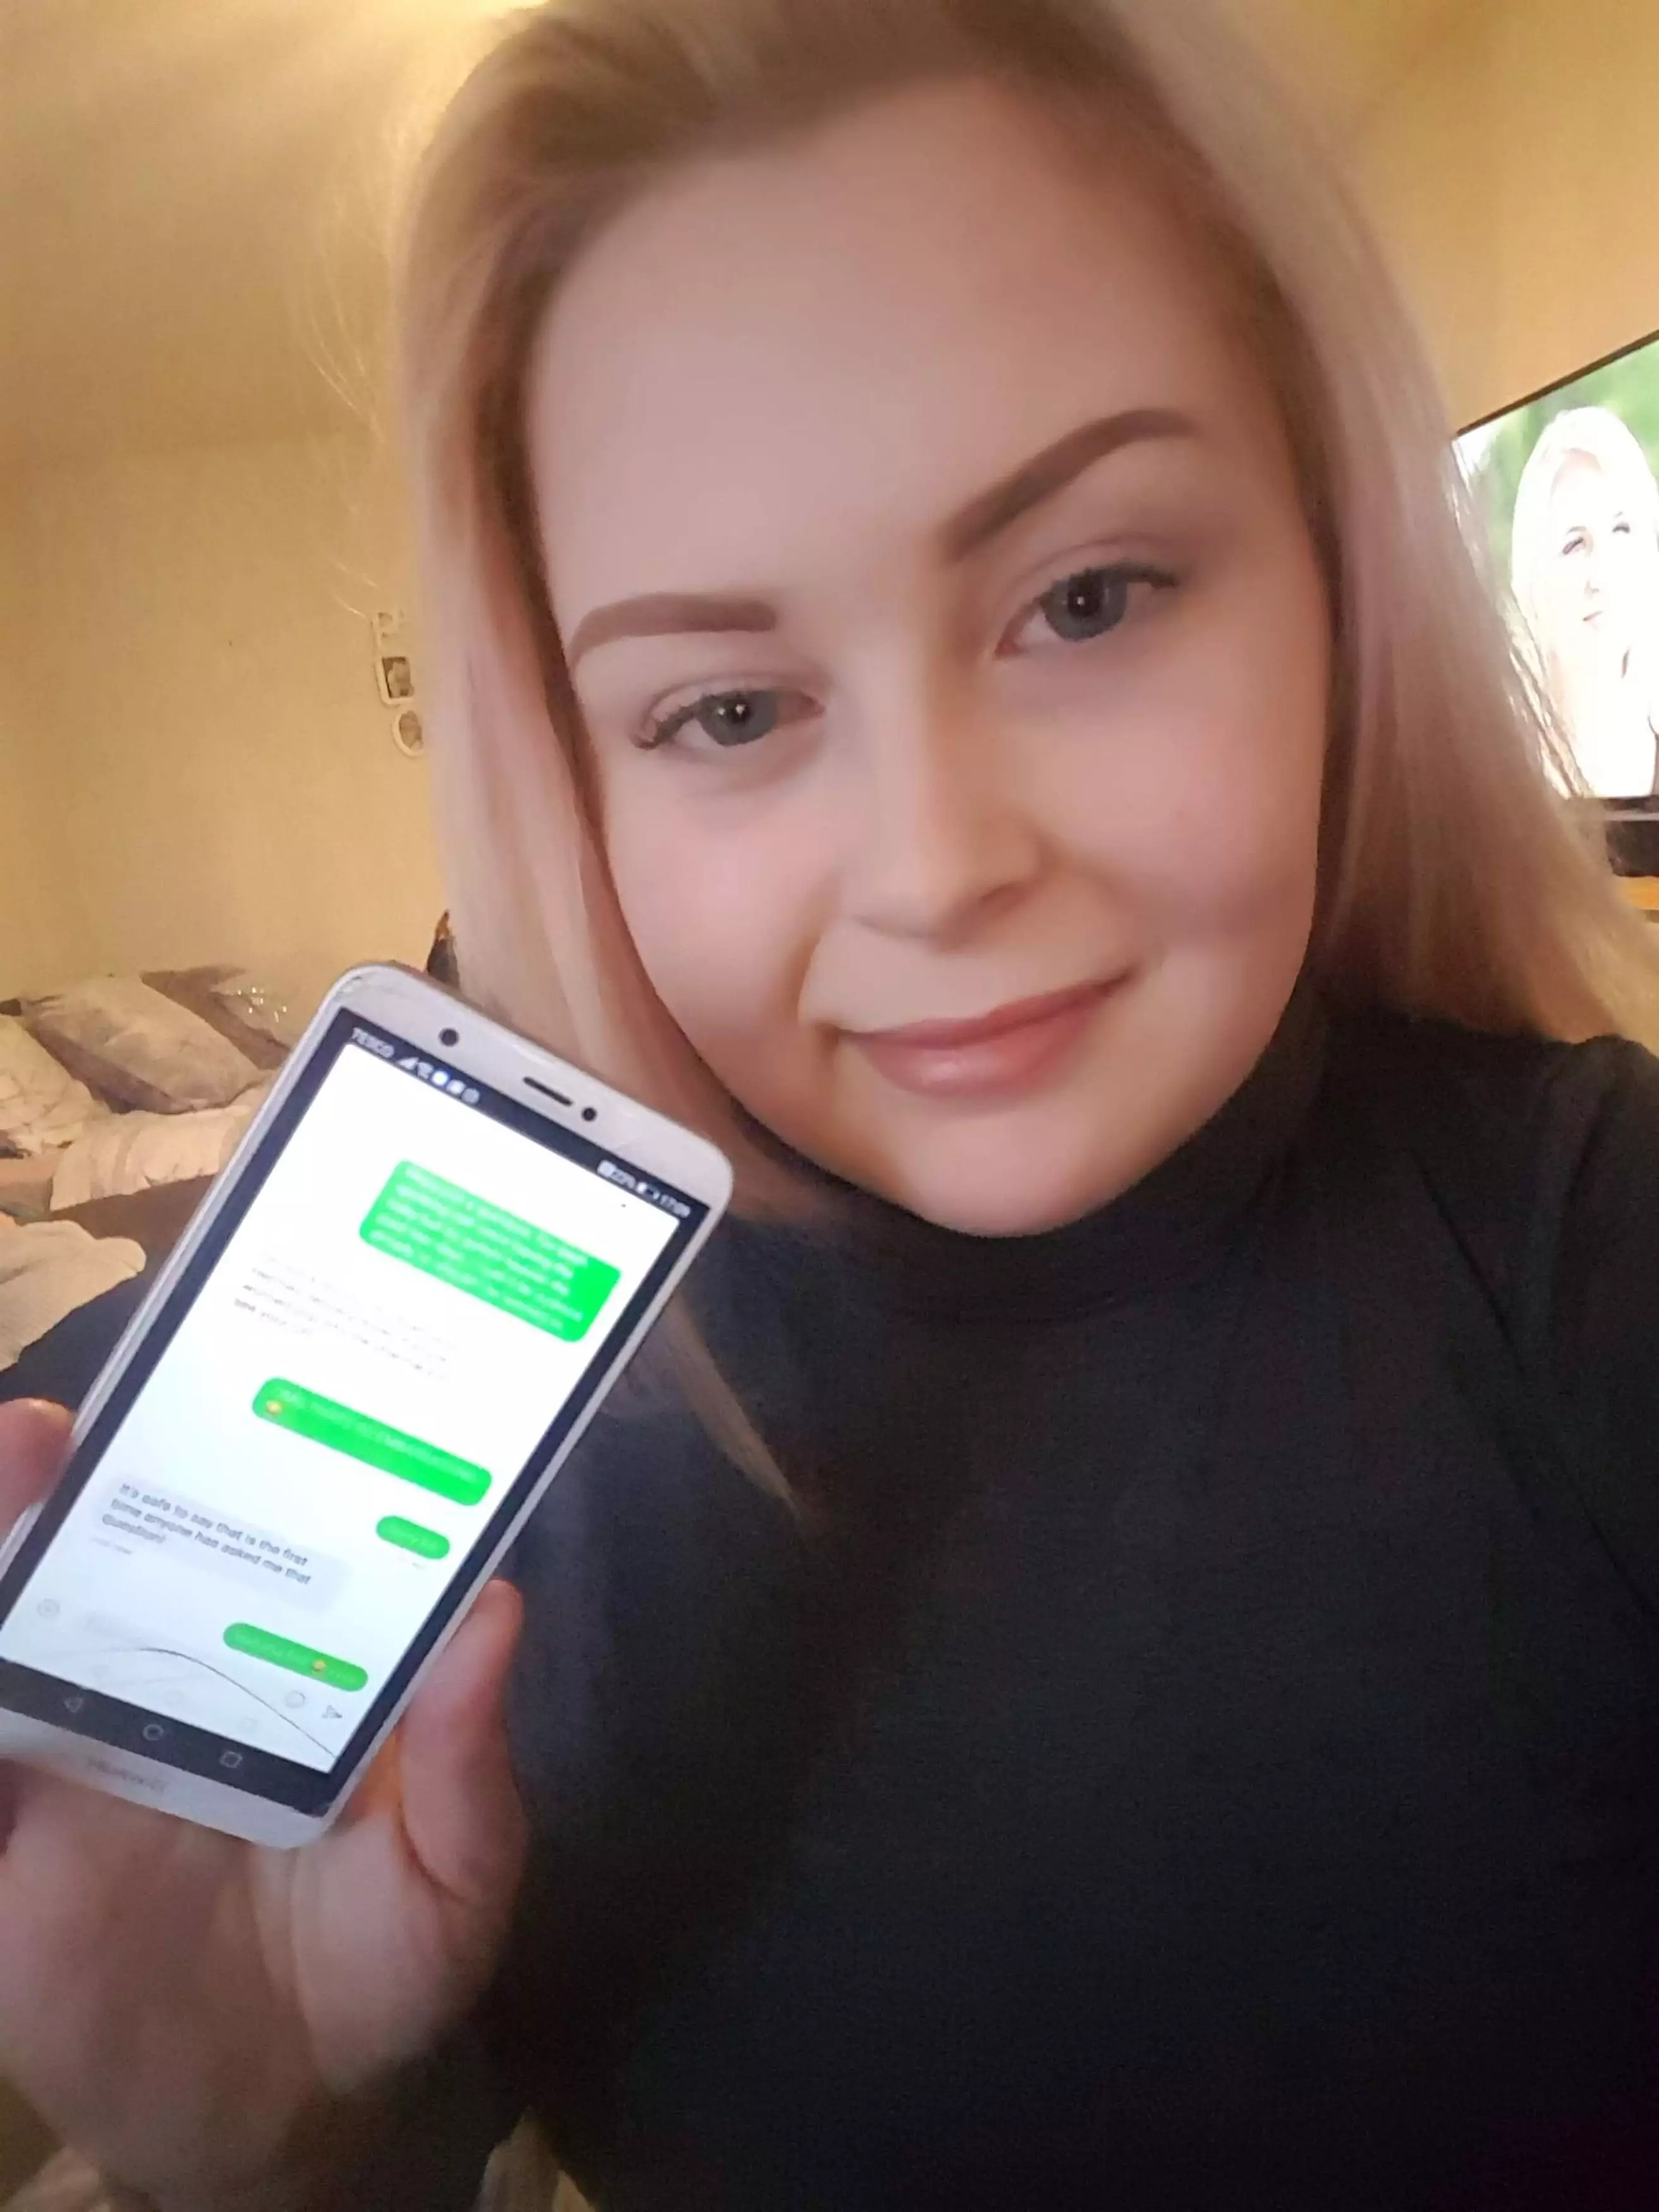 New mum Jessica Courtney accidentally texted a Hermes delivery driver a question about postpartum bleeding.